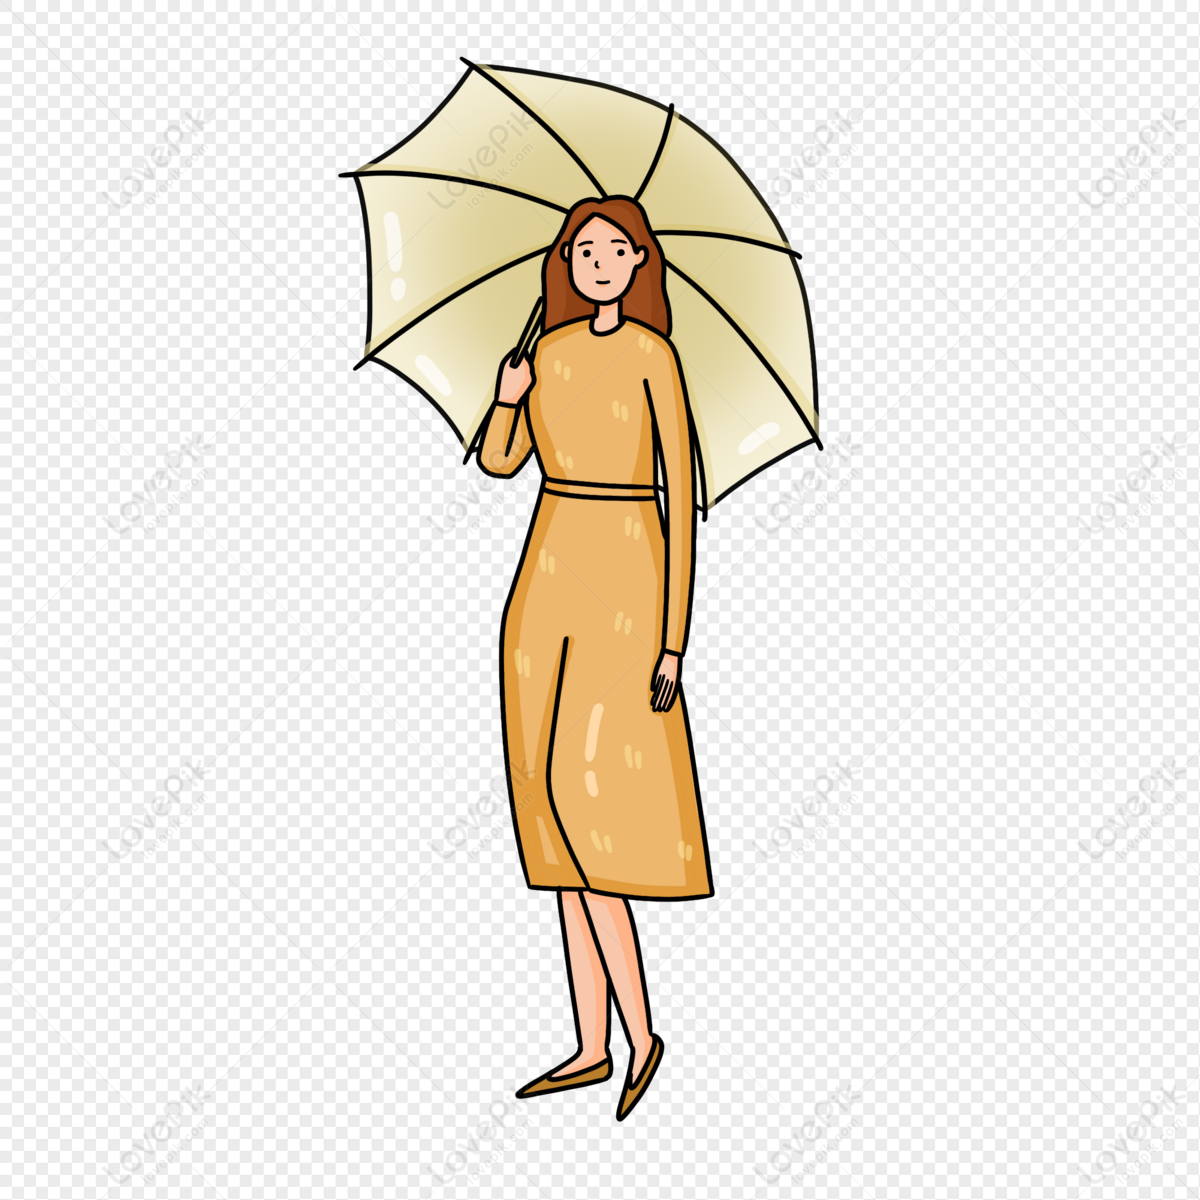 Kid Girl With Umbrella, Drawing Stock Photo, Picture and Royalty Free  Image. Image 6364186.